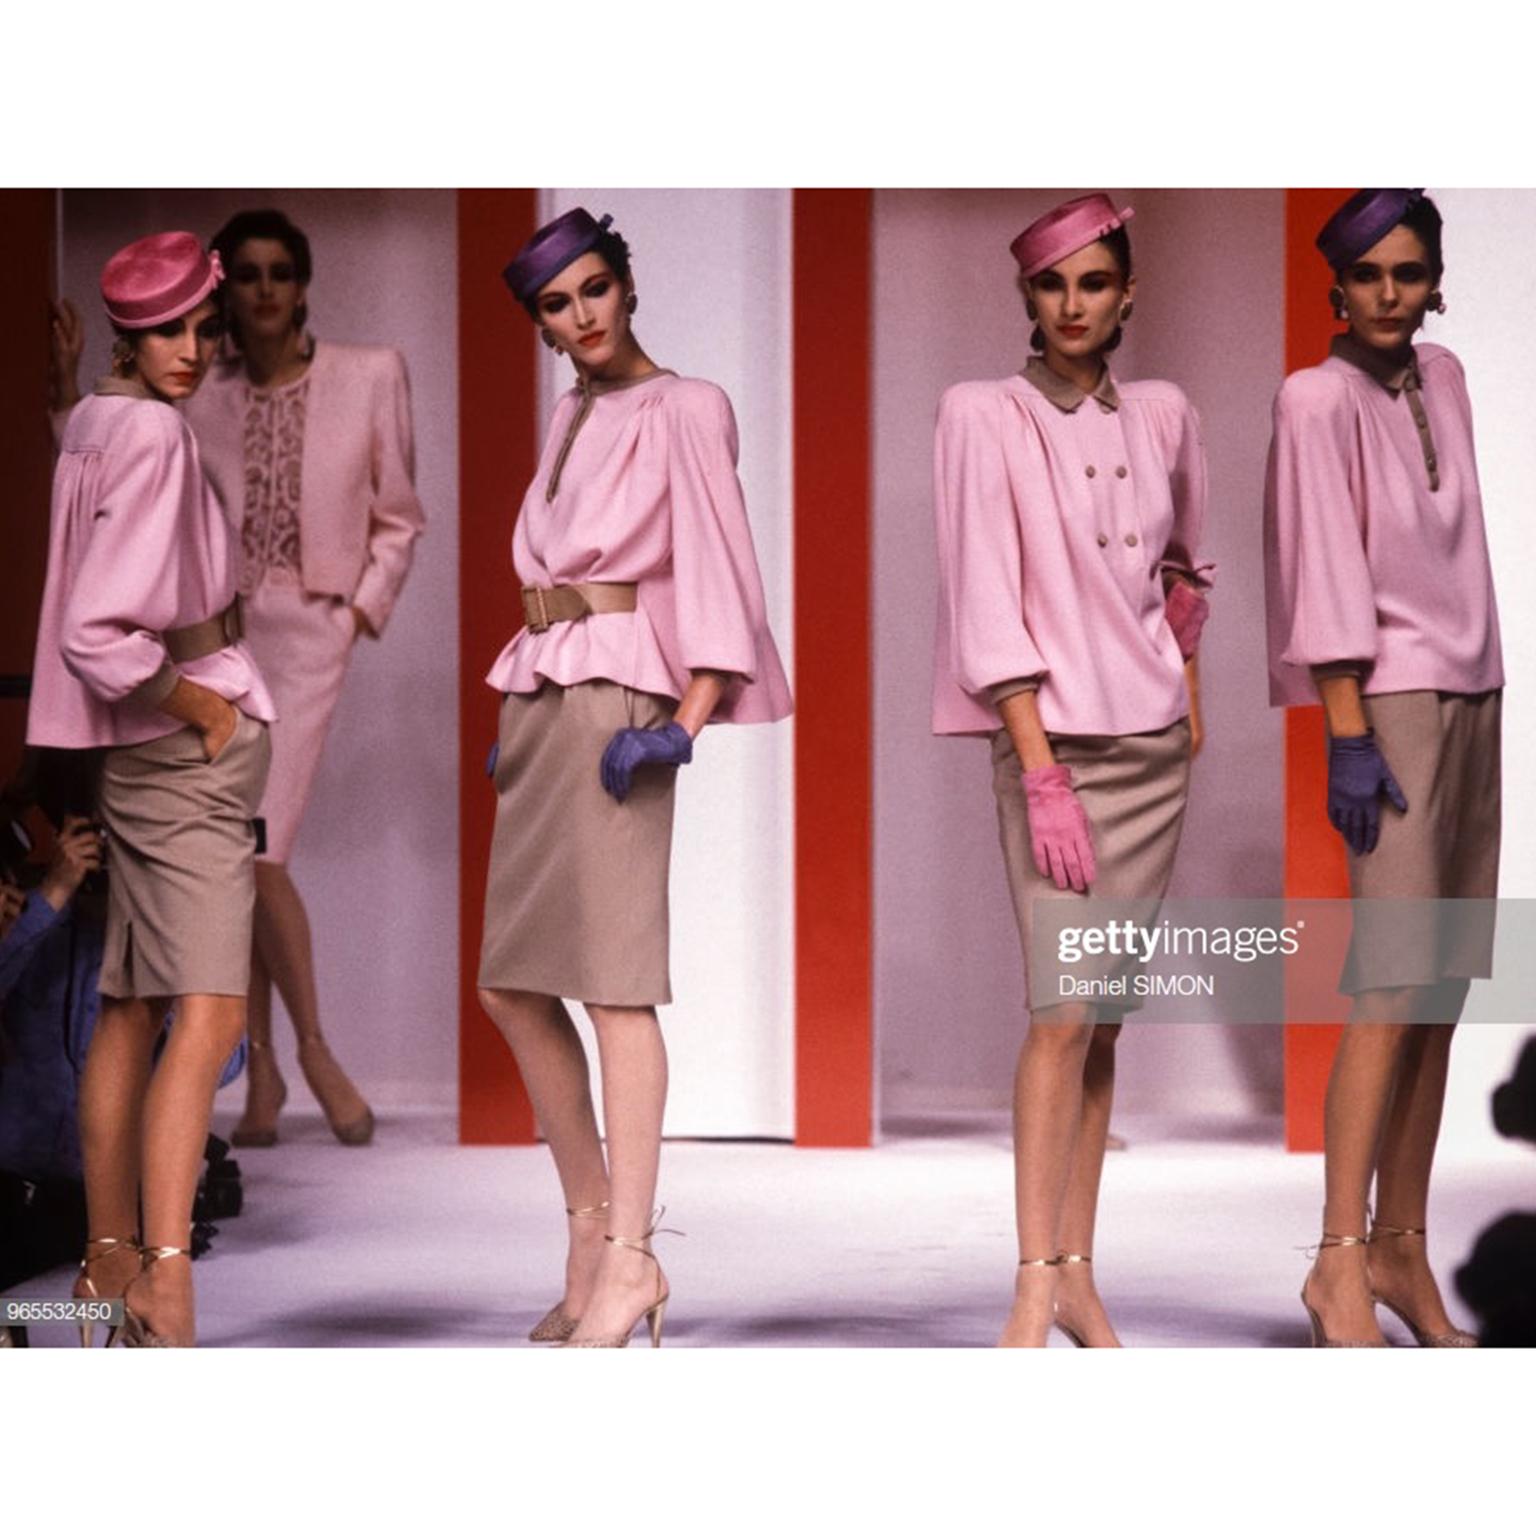 This incredible 2 piece outfit is from the Fall Winter 1984 collection for Valentino. This vintage suit has a pink crepe swing top with matching belt and a beige / camel colored skirt. The top has a gathered full back and can be worn in a number of